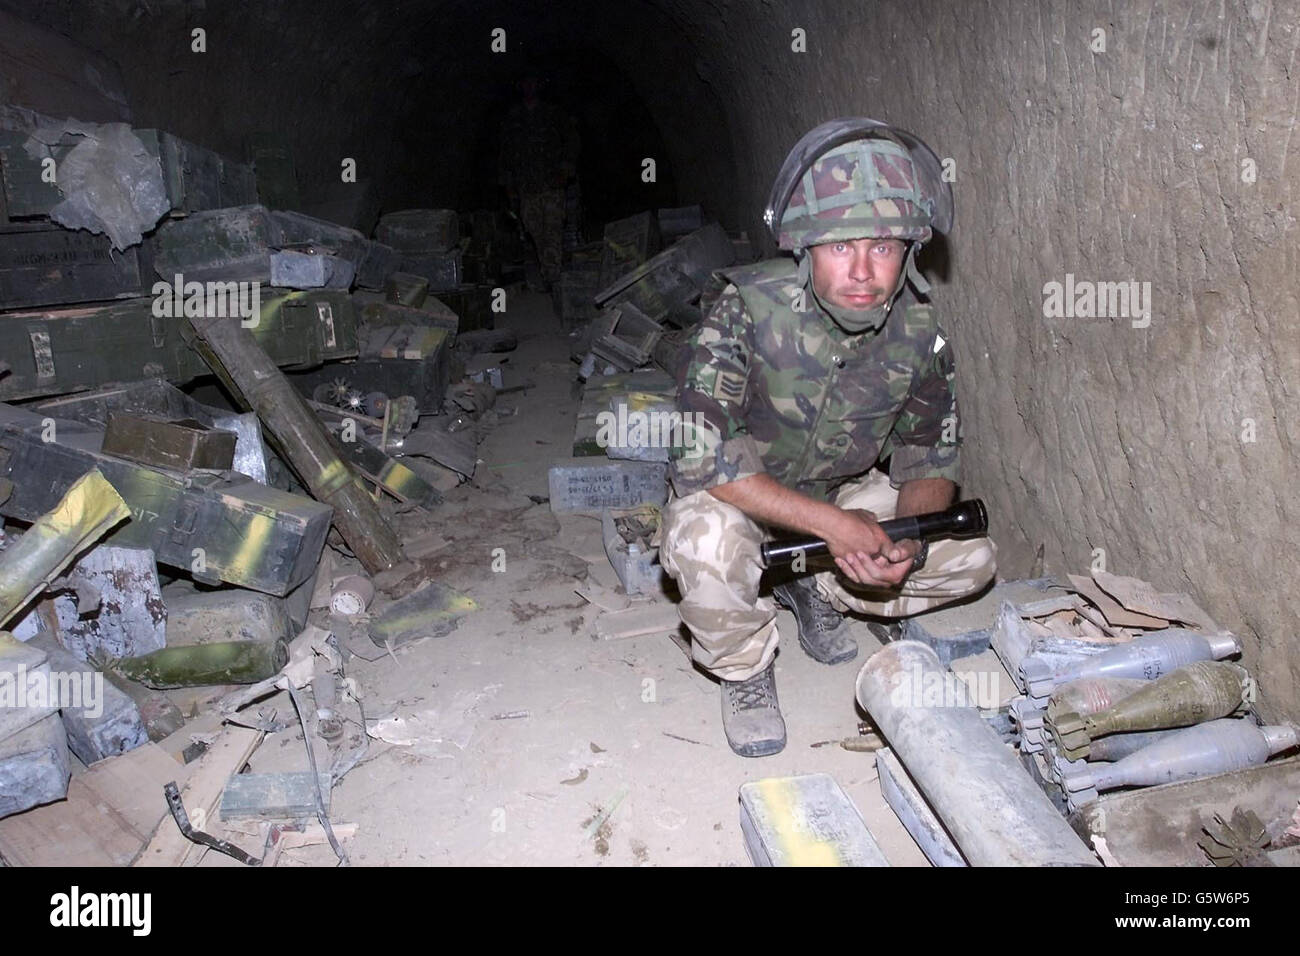 A British Royal Marine at one of the caves in Afghanistan, where they found what their commander, Brigadier Richard Lane, described as a large weapons cache during their part in Operation Snipe. The entrances to the four caves are blocked by metal doors. *... and they are about six to seven feet wide and high. Stock Photo